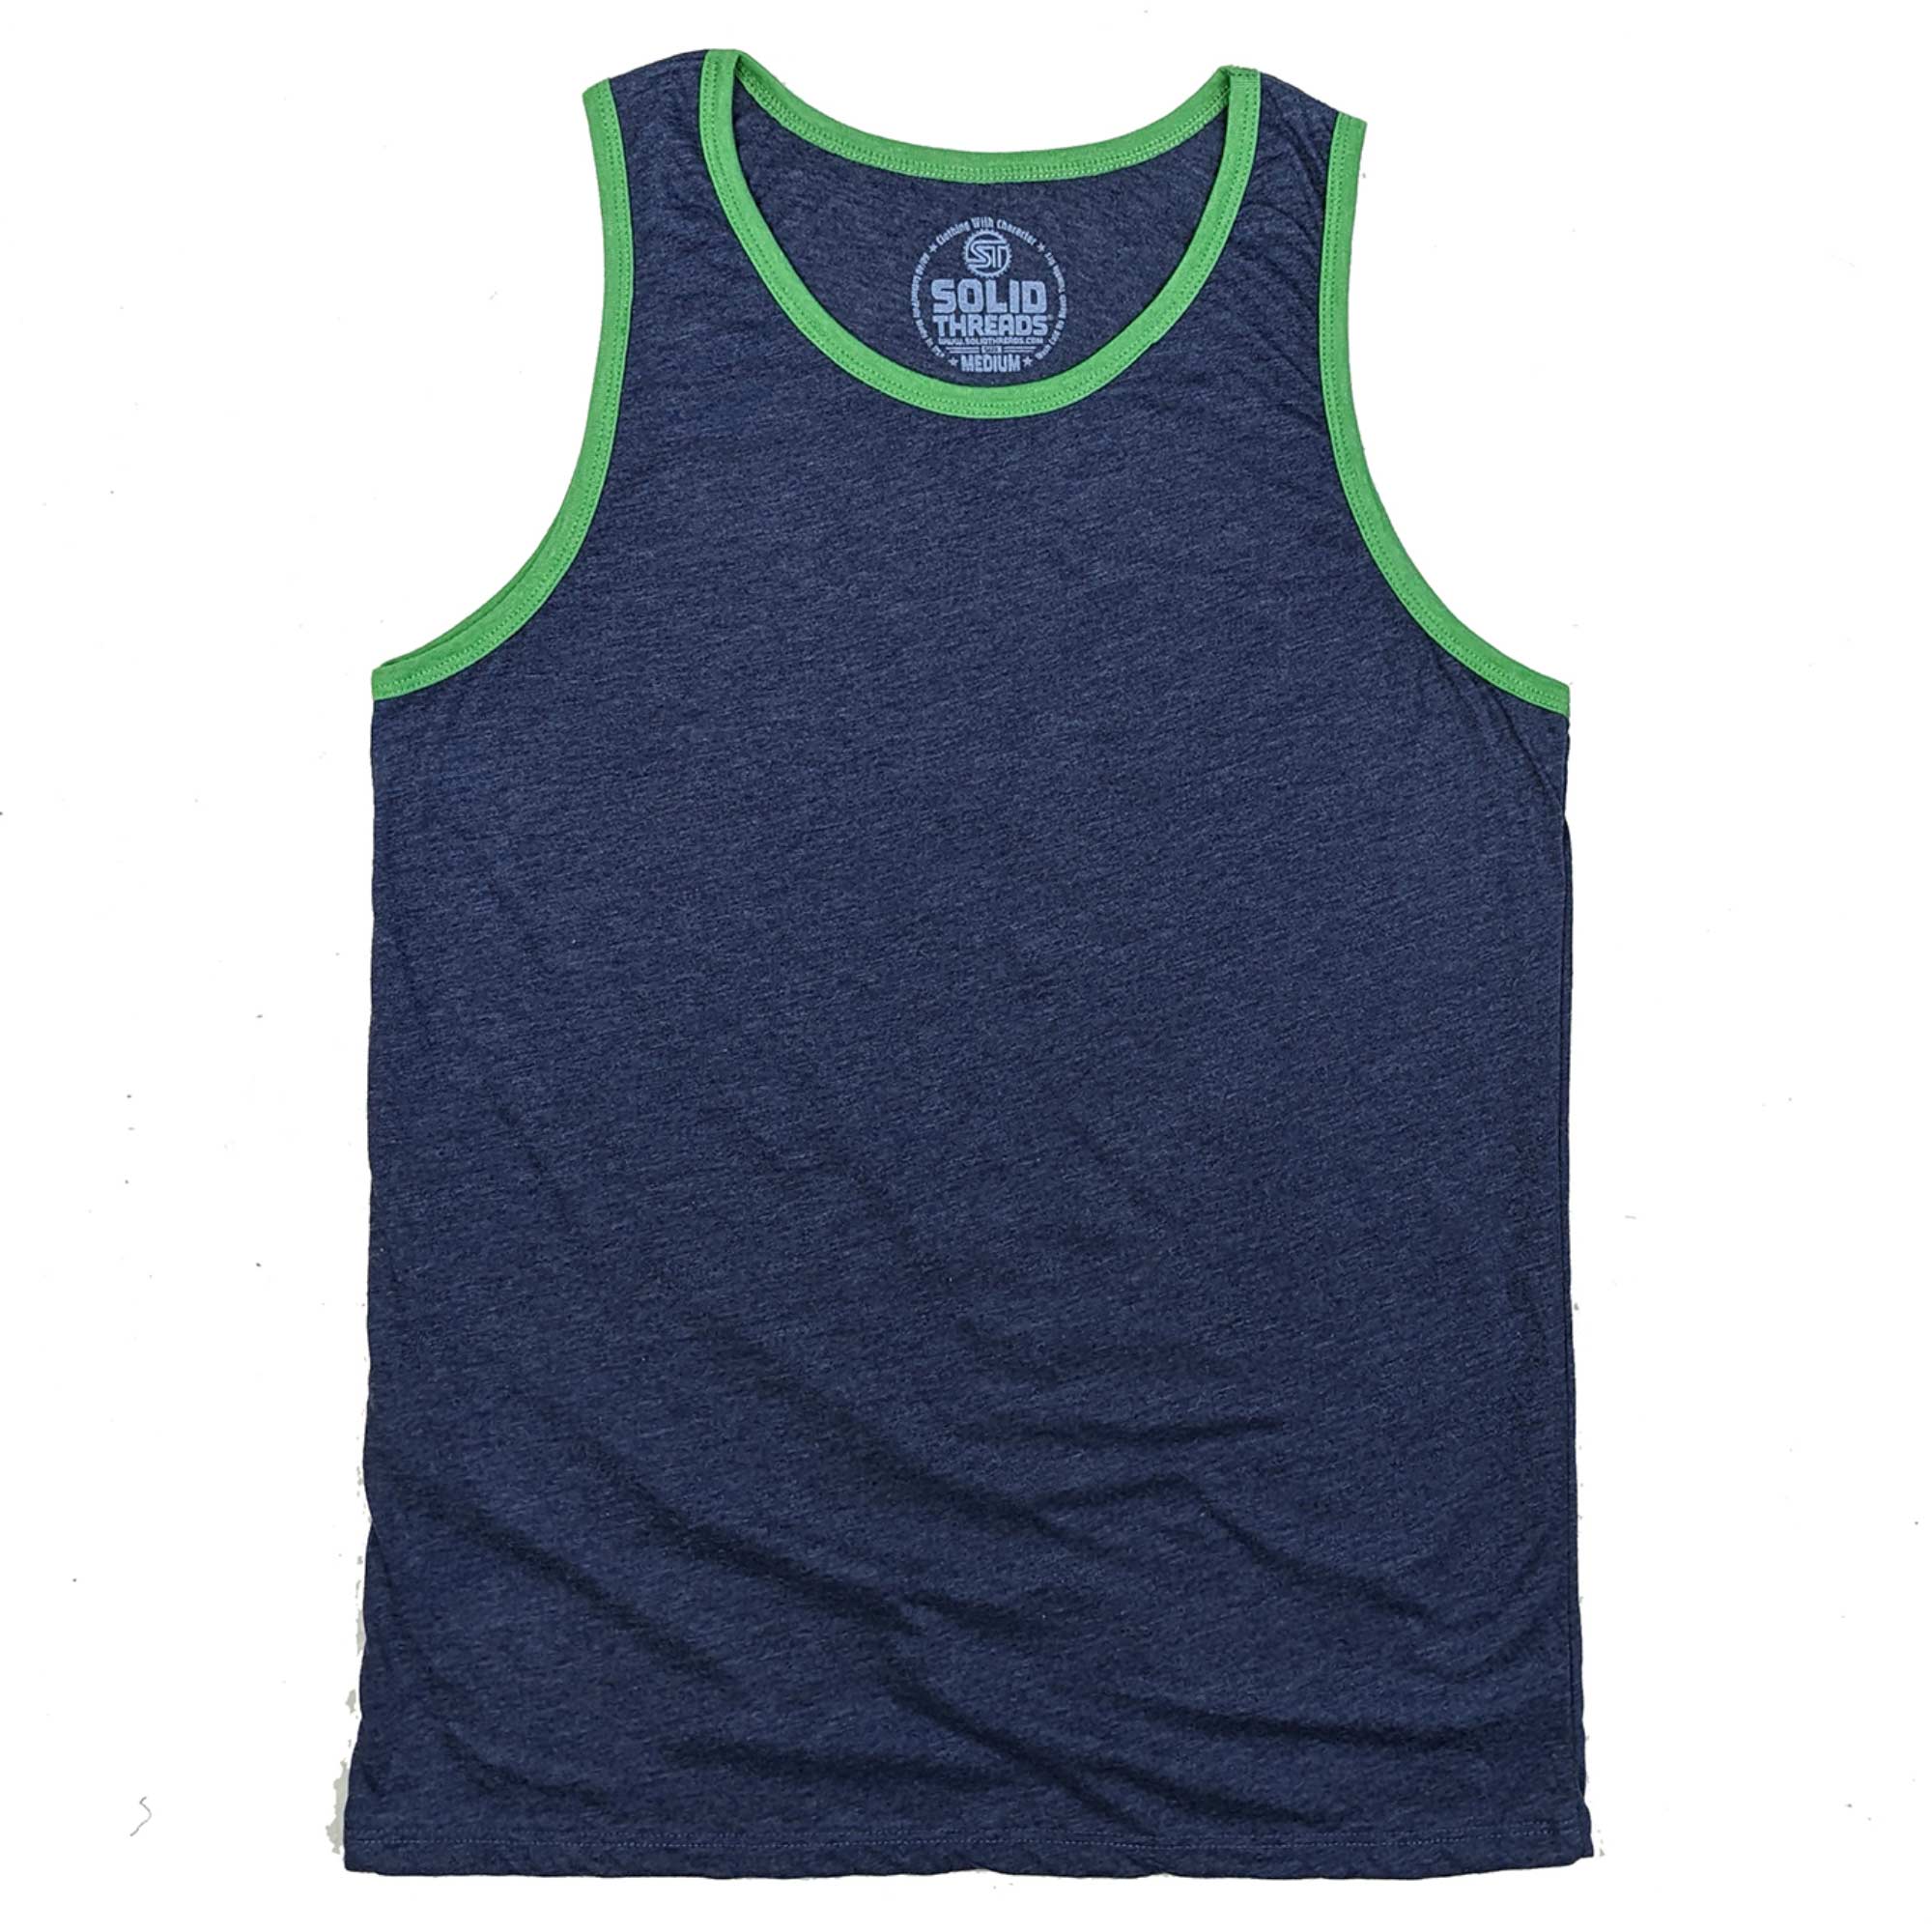 Men's Solid Threads Retro Ringer Tank Top Triblend Navy/Kelly | Vintage Inspired USA Made Tank Top